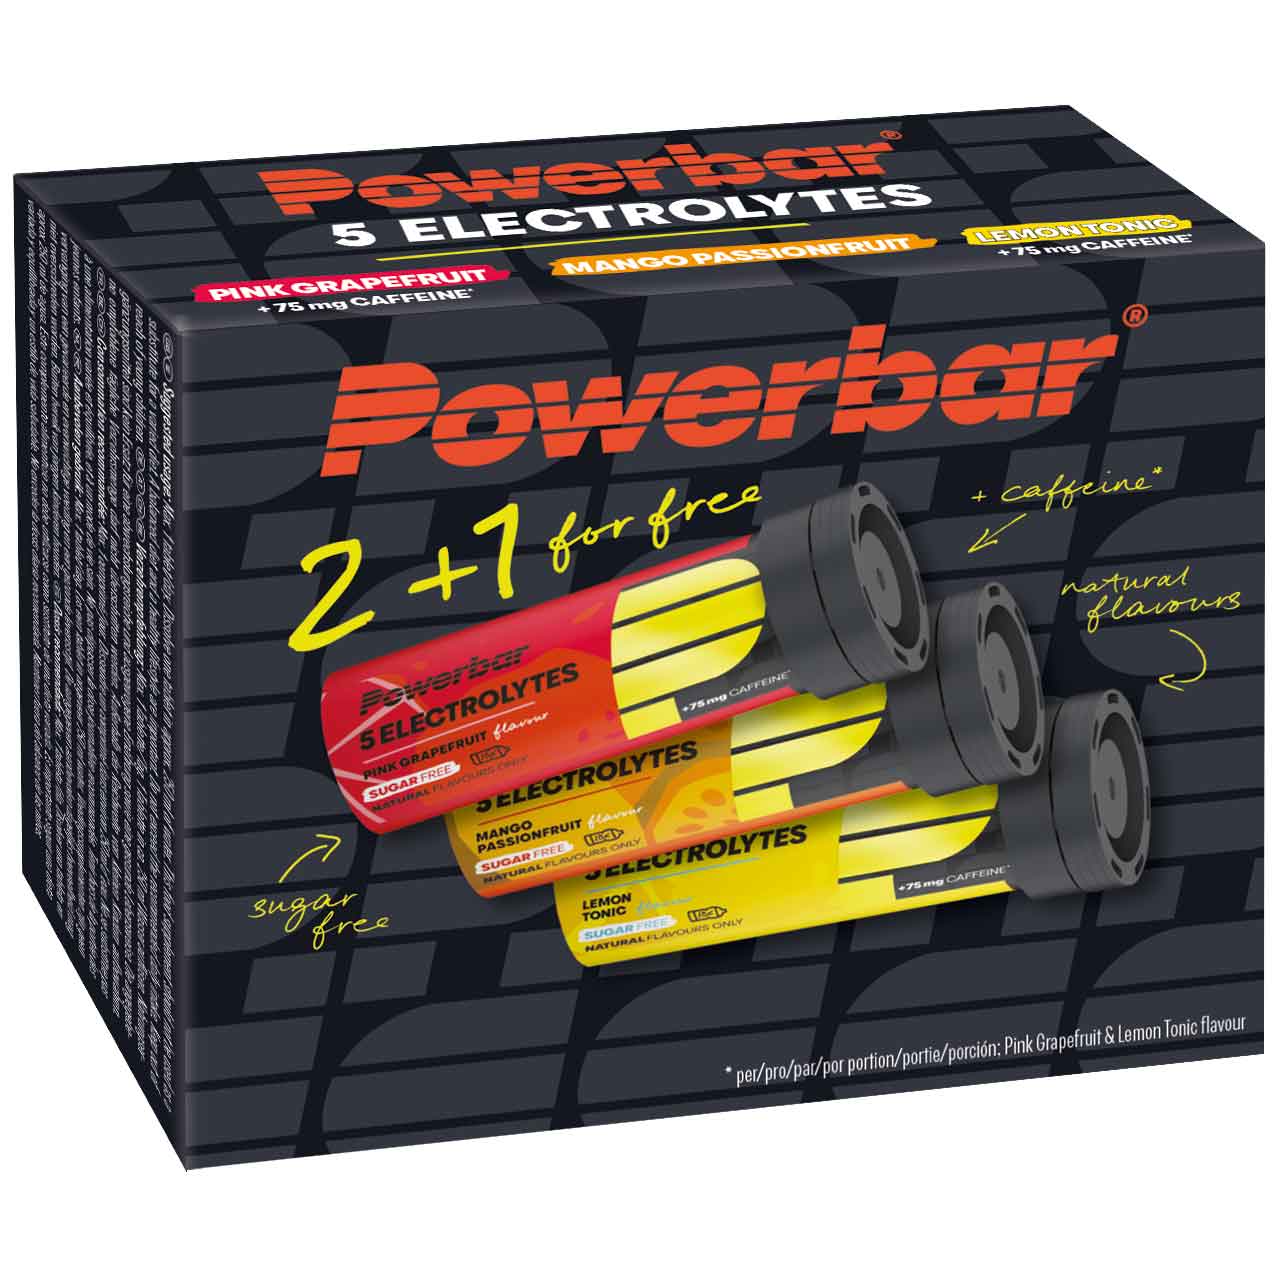 Picture of Powerbar 5Electrolytes Multiflavour Pack - Sports Drink Tablets - 2 + 1 free (30 pcs.)